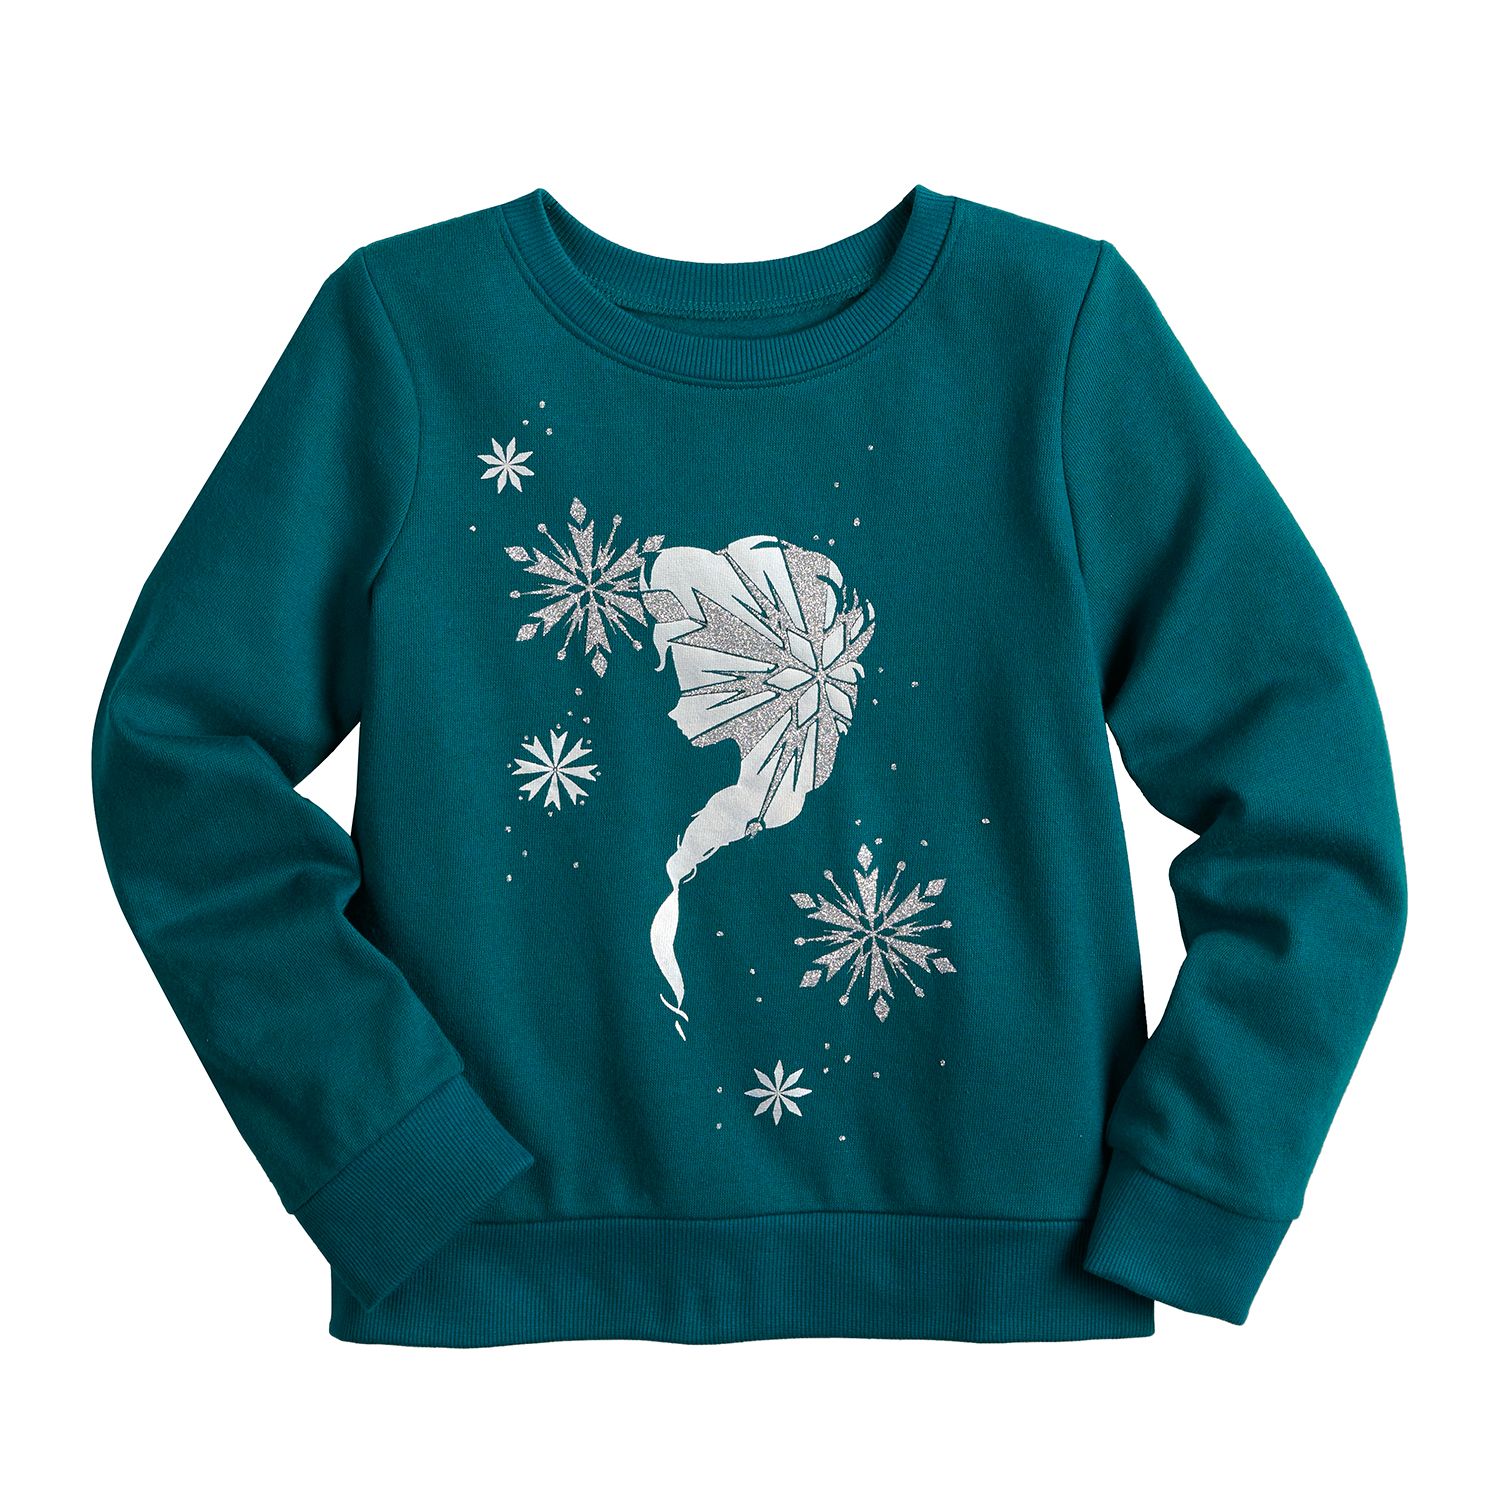 Image for Disney/Jumping Beans Disney's Elsa Girls 4-12 Pullover by Jumping Beans® at Kohl's.